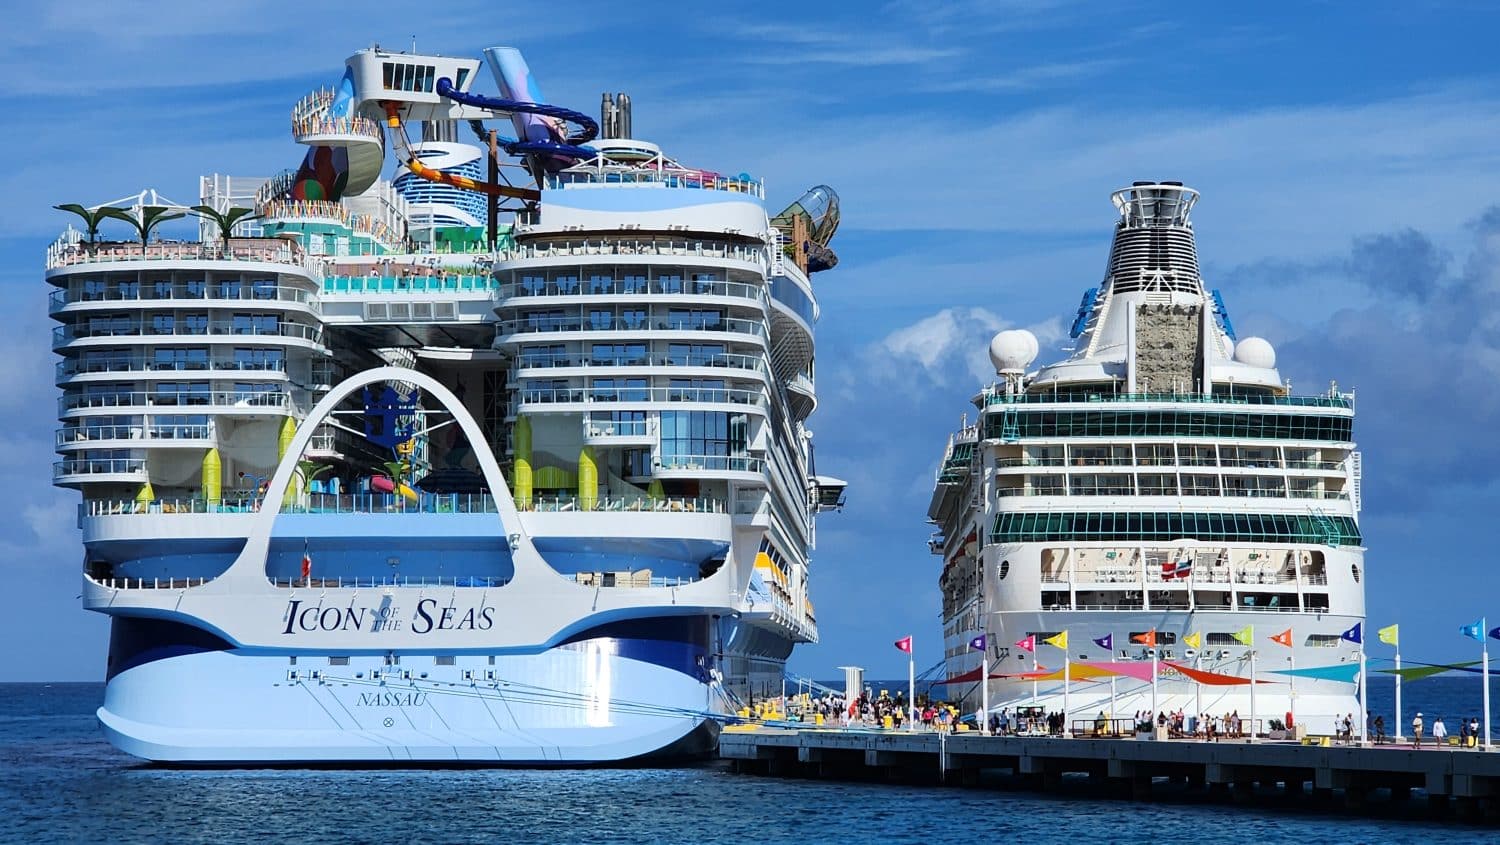 Royal Caribbean's Icon of the Seas (Left) is the largest cruise ship ever built and will sail its inaugural cruise this weekend.